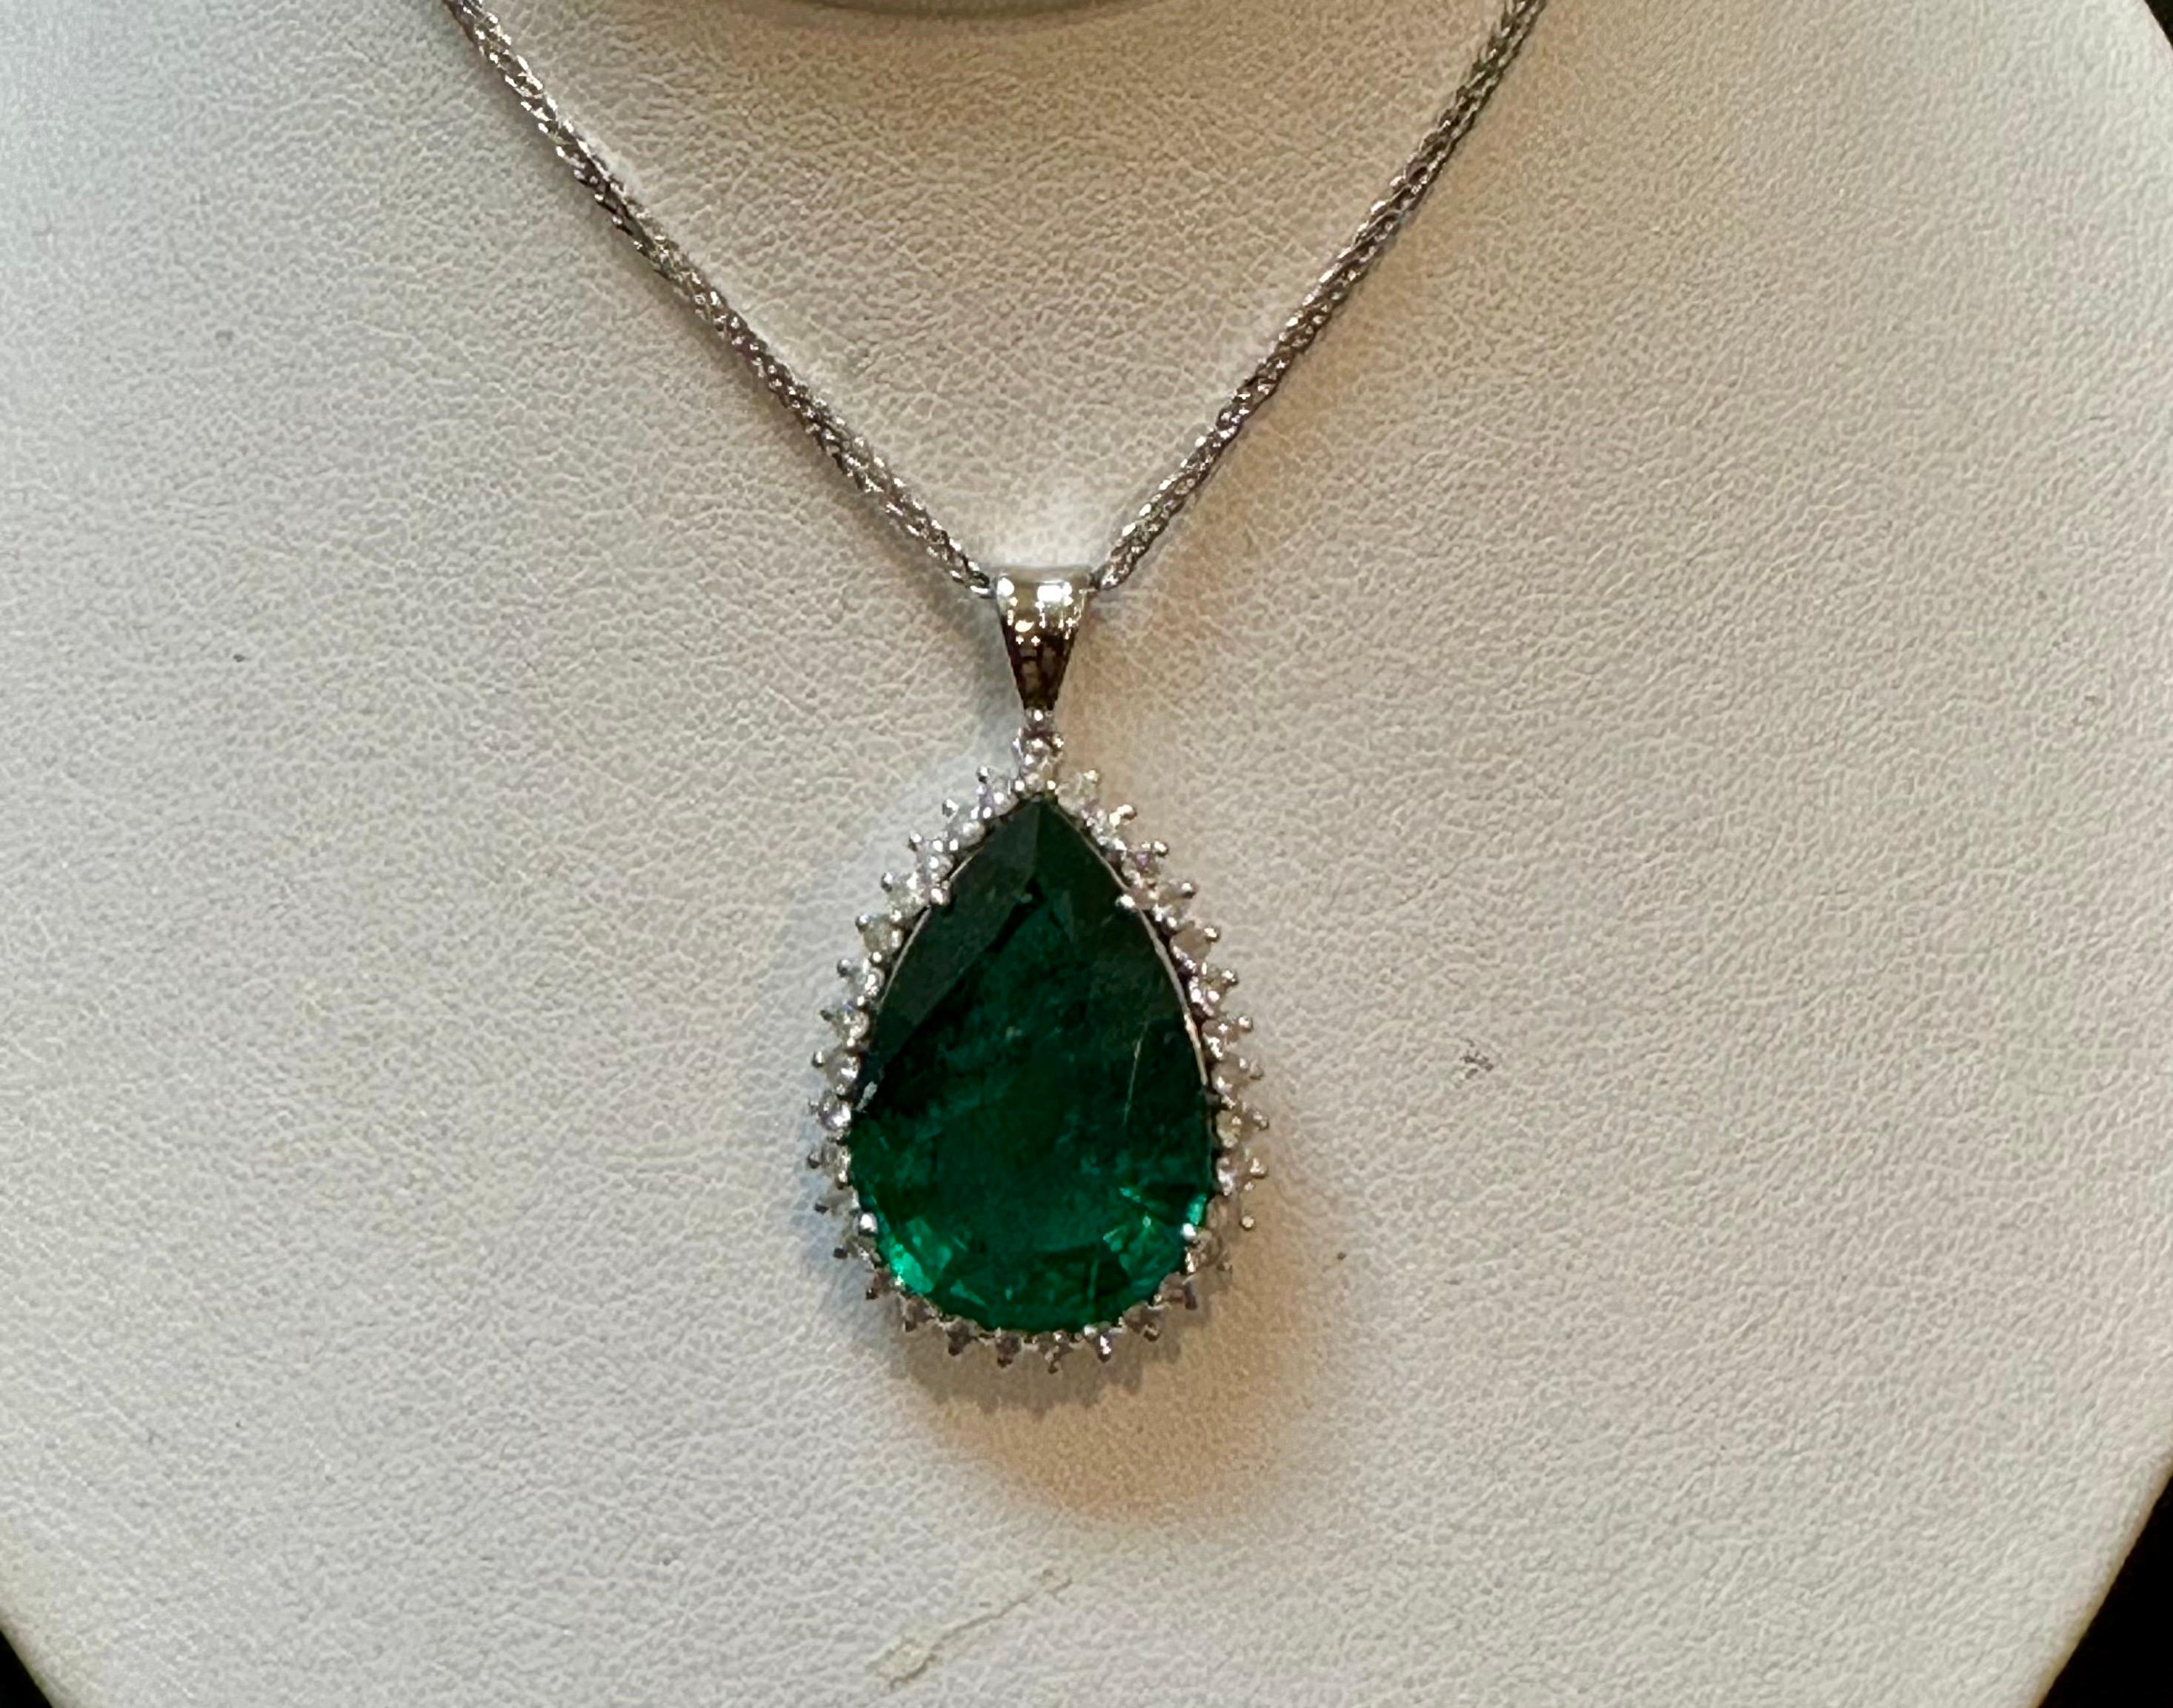 Women's 13 Ct Pear Cut Emerald & 1 Ct Diamond Halo Pendent/Necklace 14 KW Gold Chain